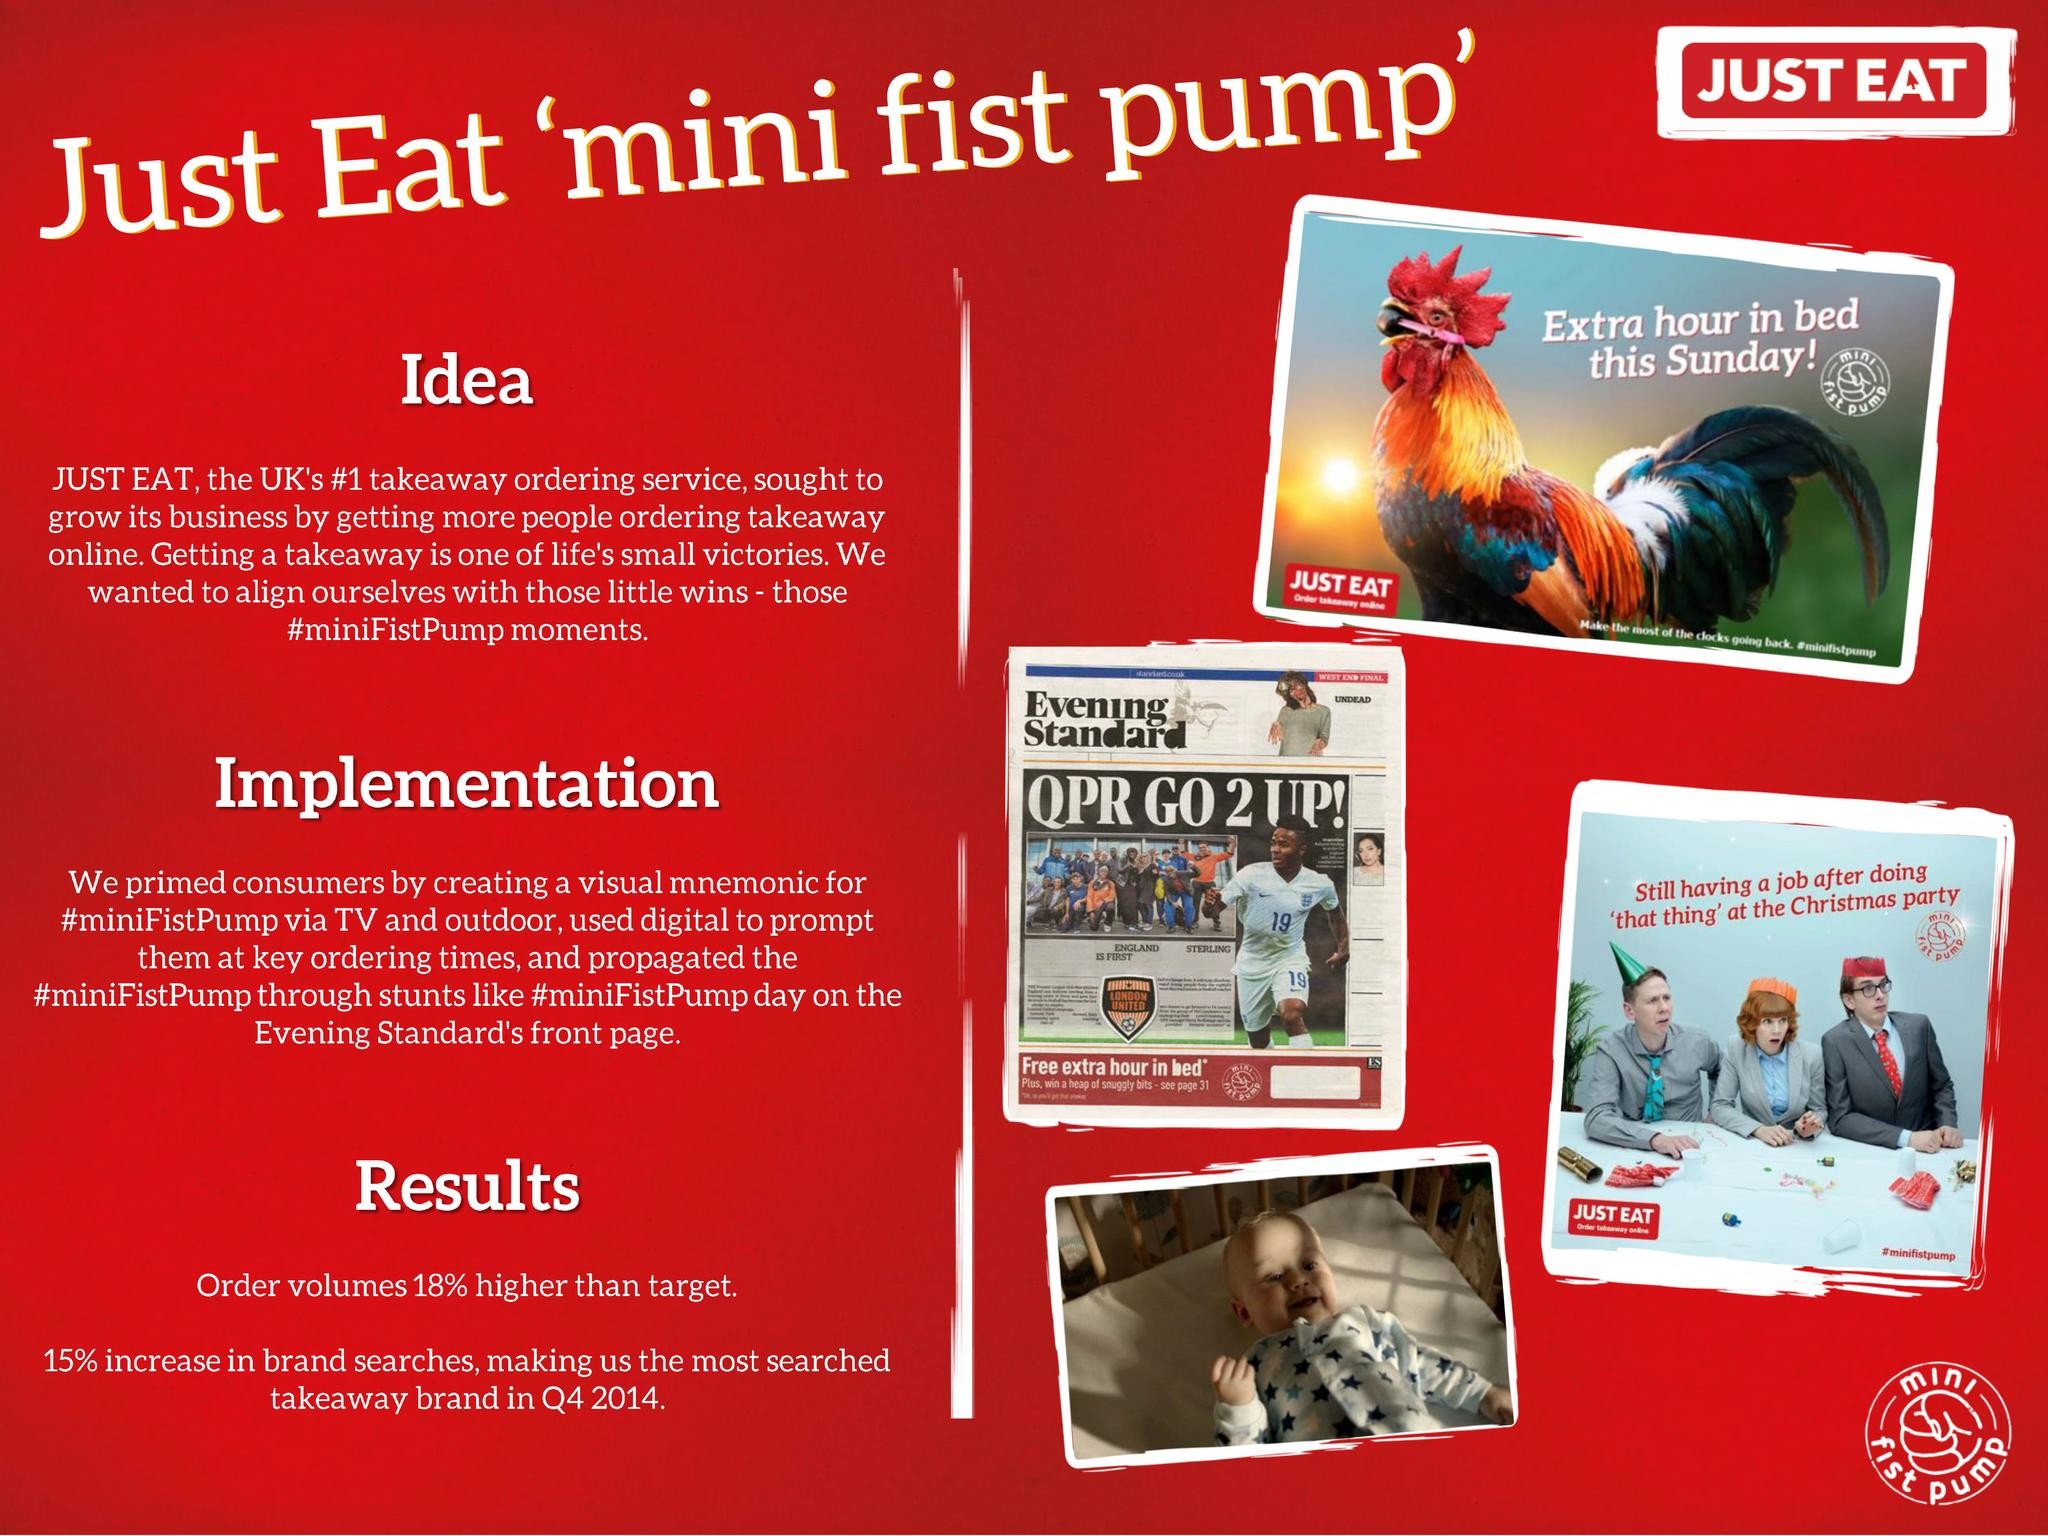 HOW JUST EAT GREW THEIR BUSINESS BY CAPTURING #MINIFISTPUMP MOMENTS